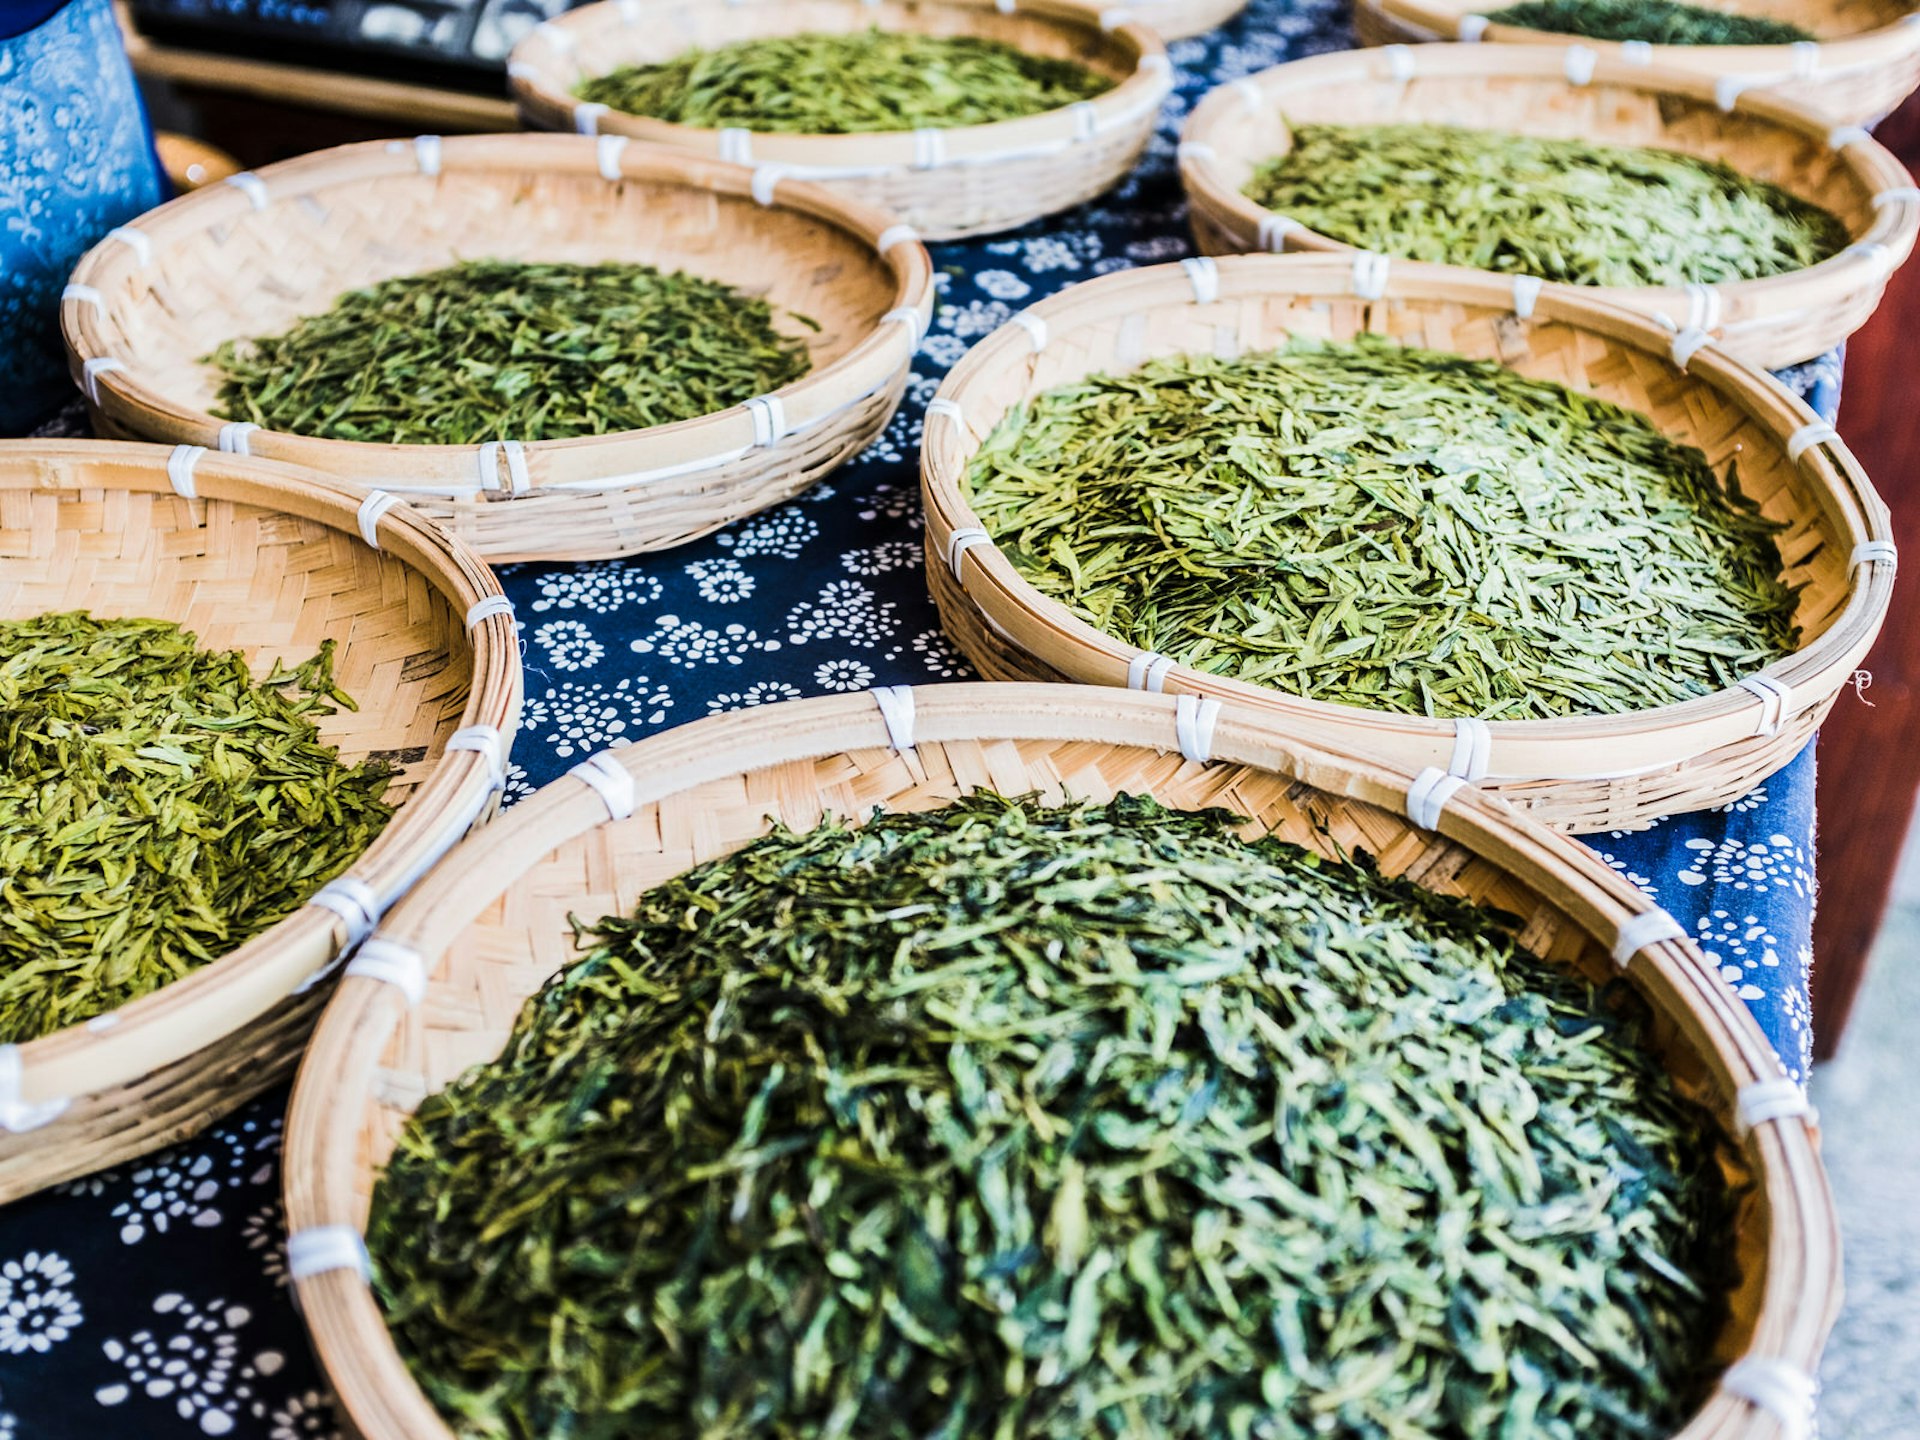 Several open baskets filled with drying tea leaves